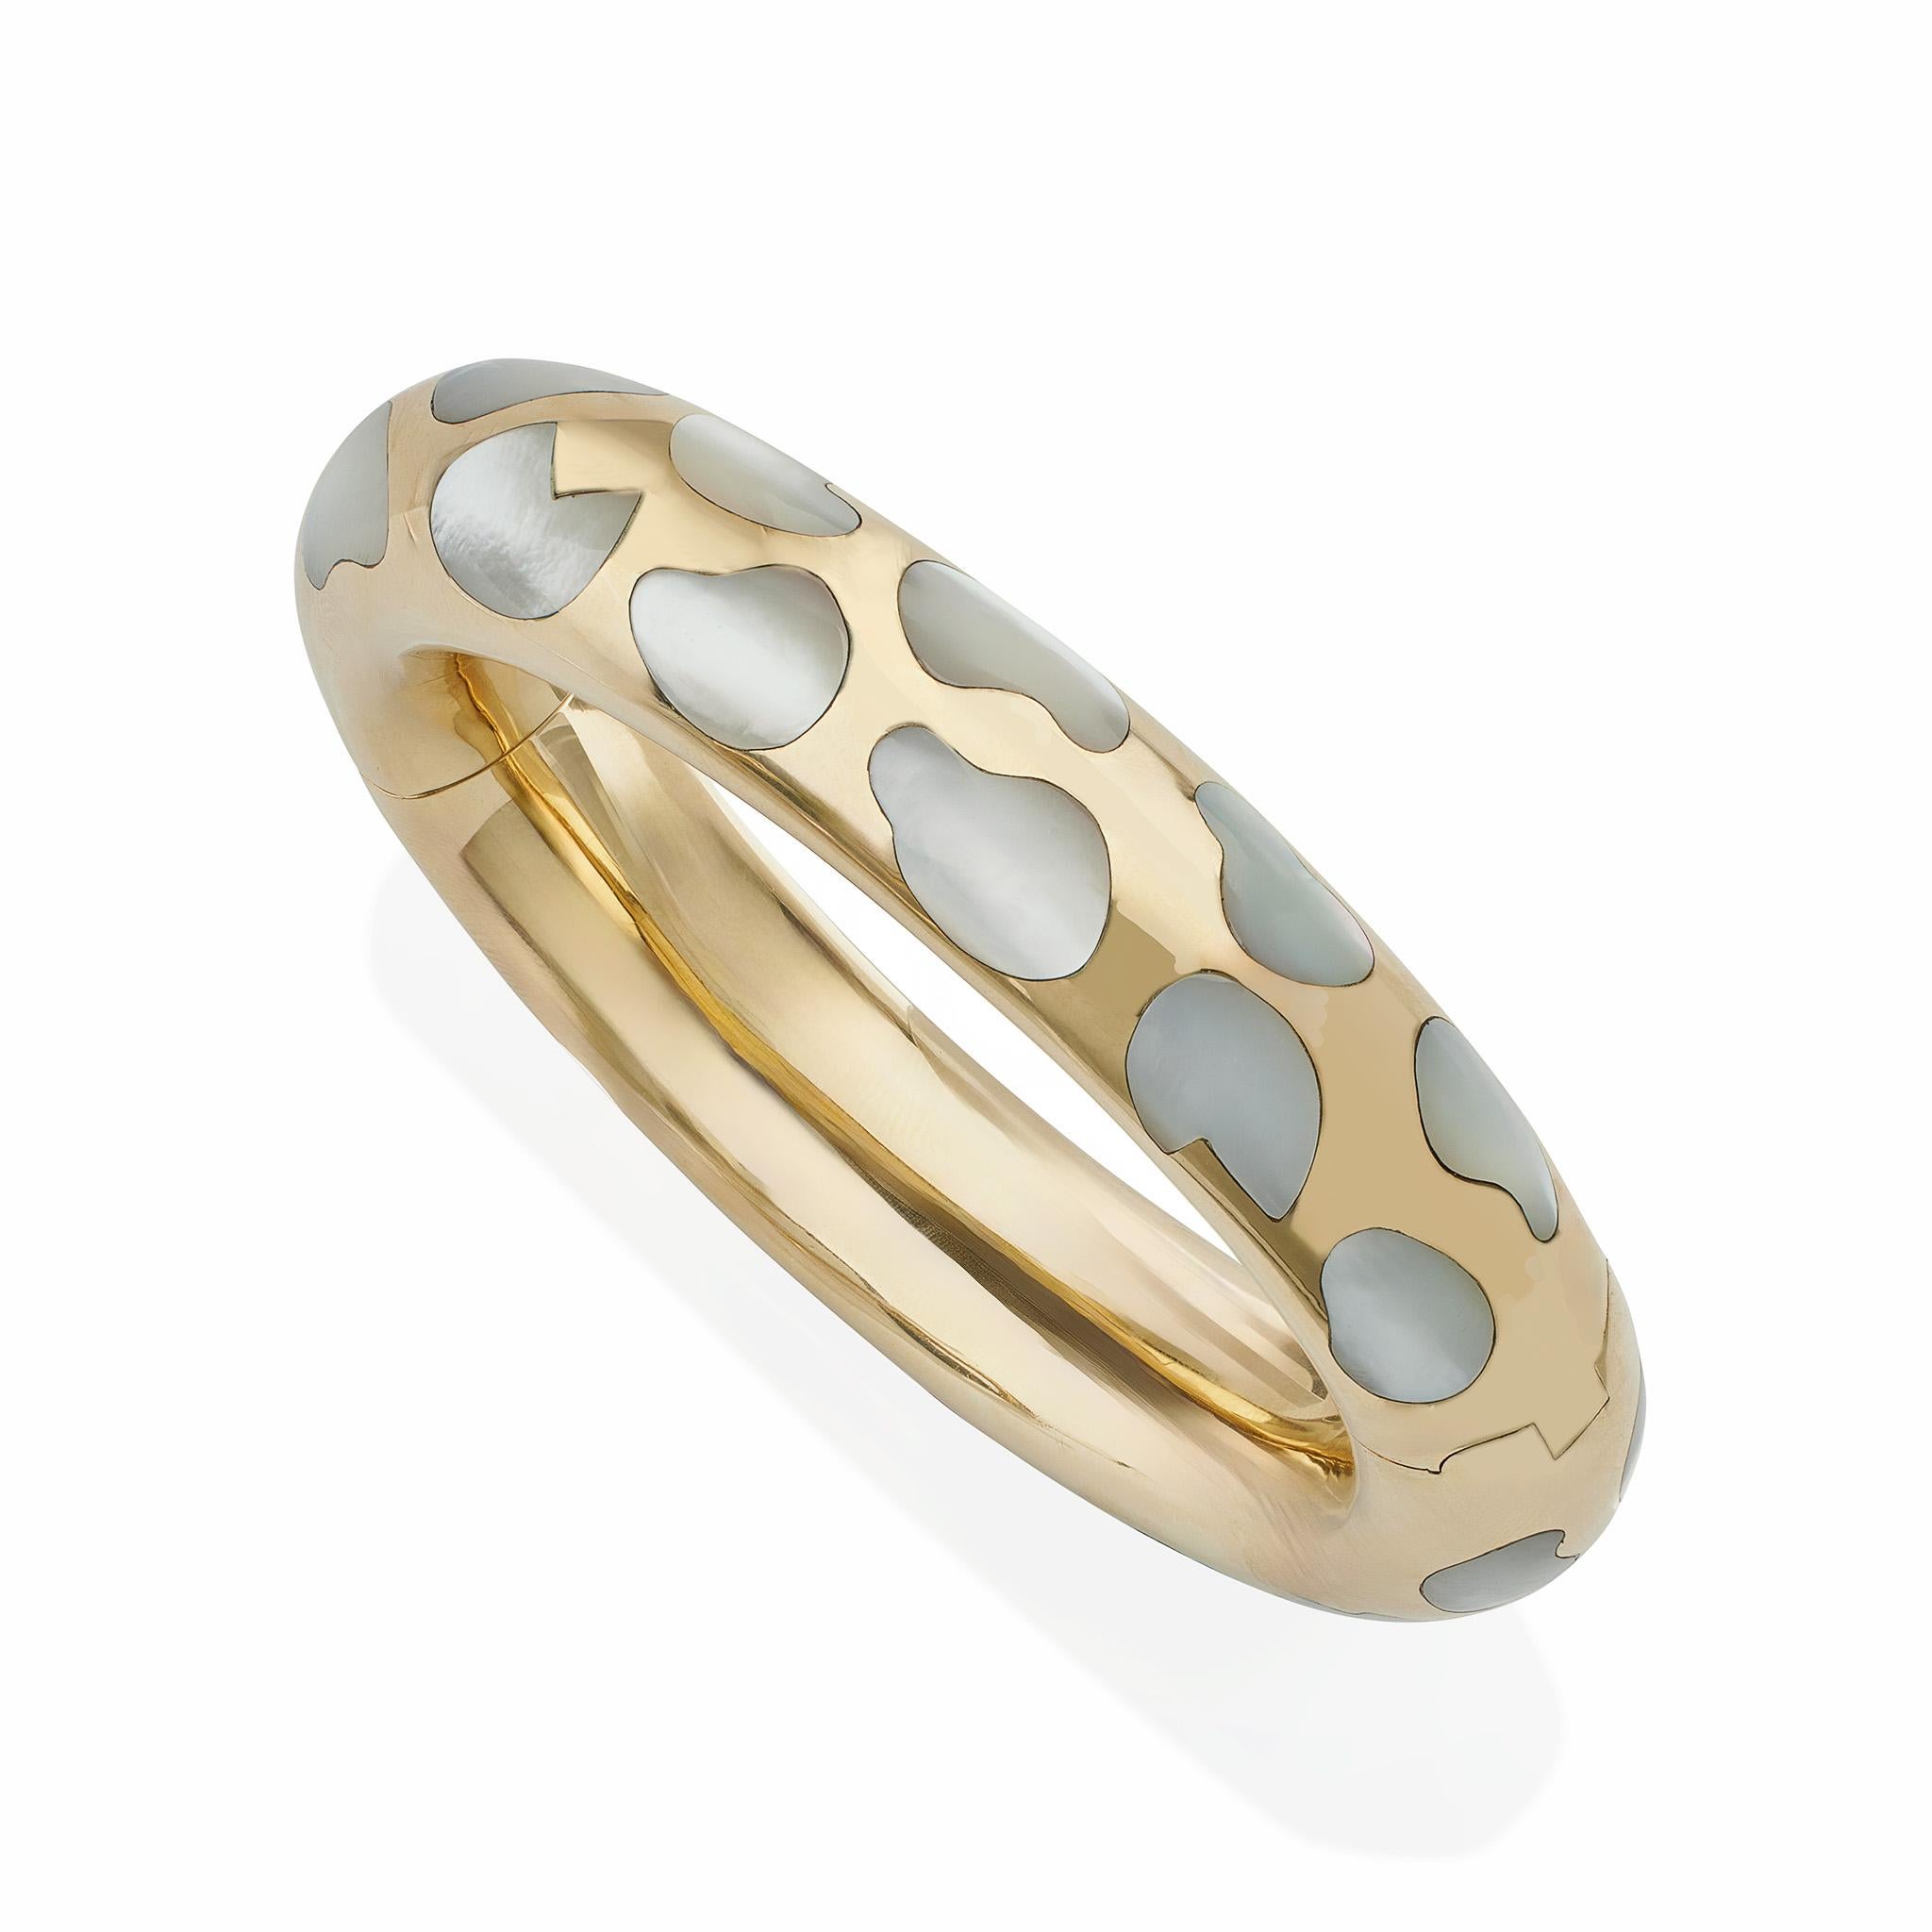 Created by Tiffany & Co. in the 1970s-1980s, this 18K gold and mother-of-pearl bracelet was designed by Angela Cummings. The hinged, polished 18K gold bangle is inlaid with irregular spots of mother-of-pearl resembling a leopard skin that are flush